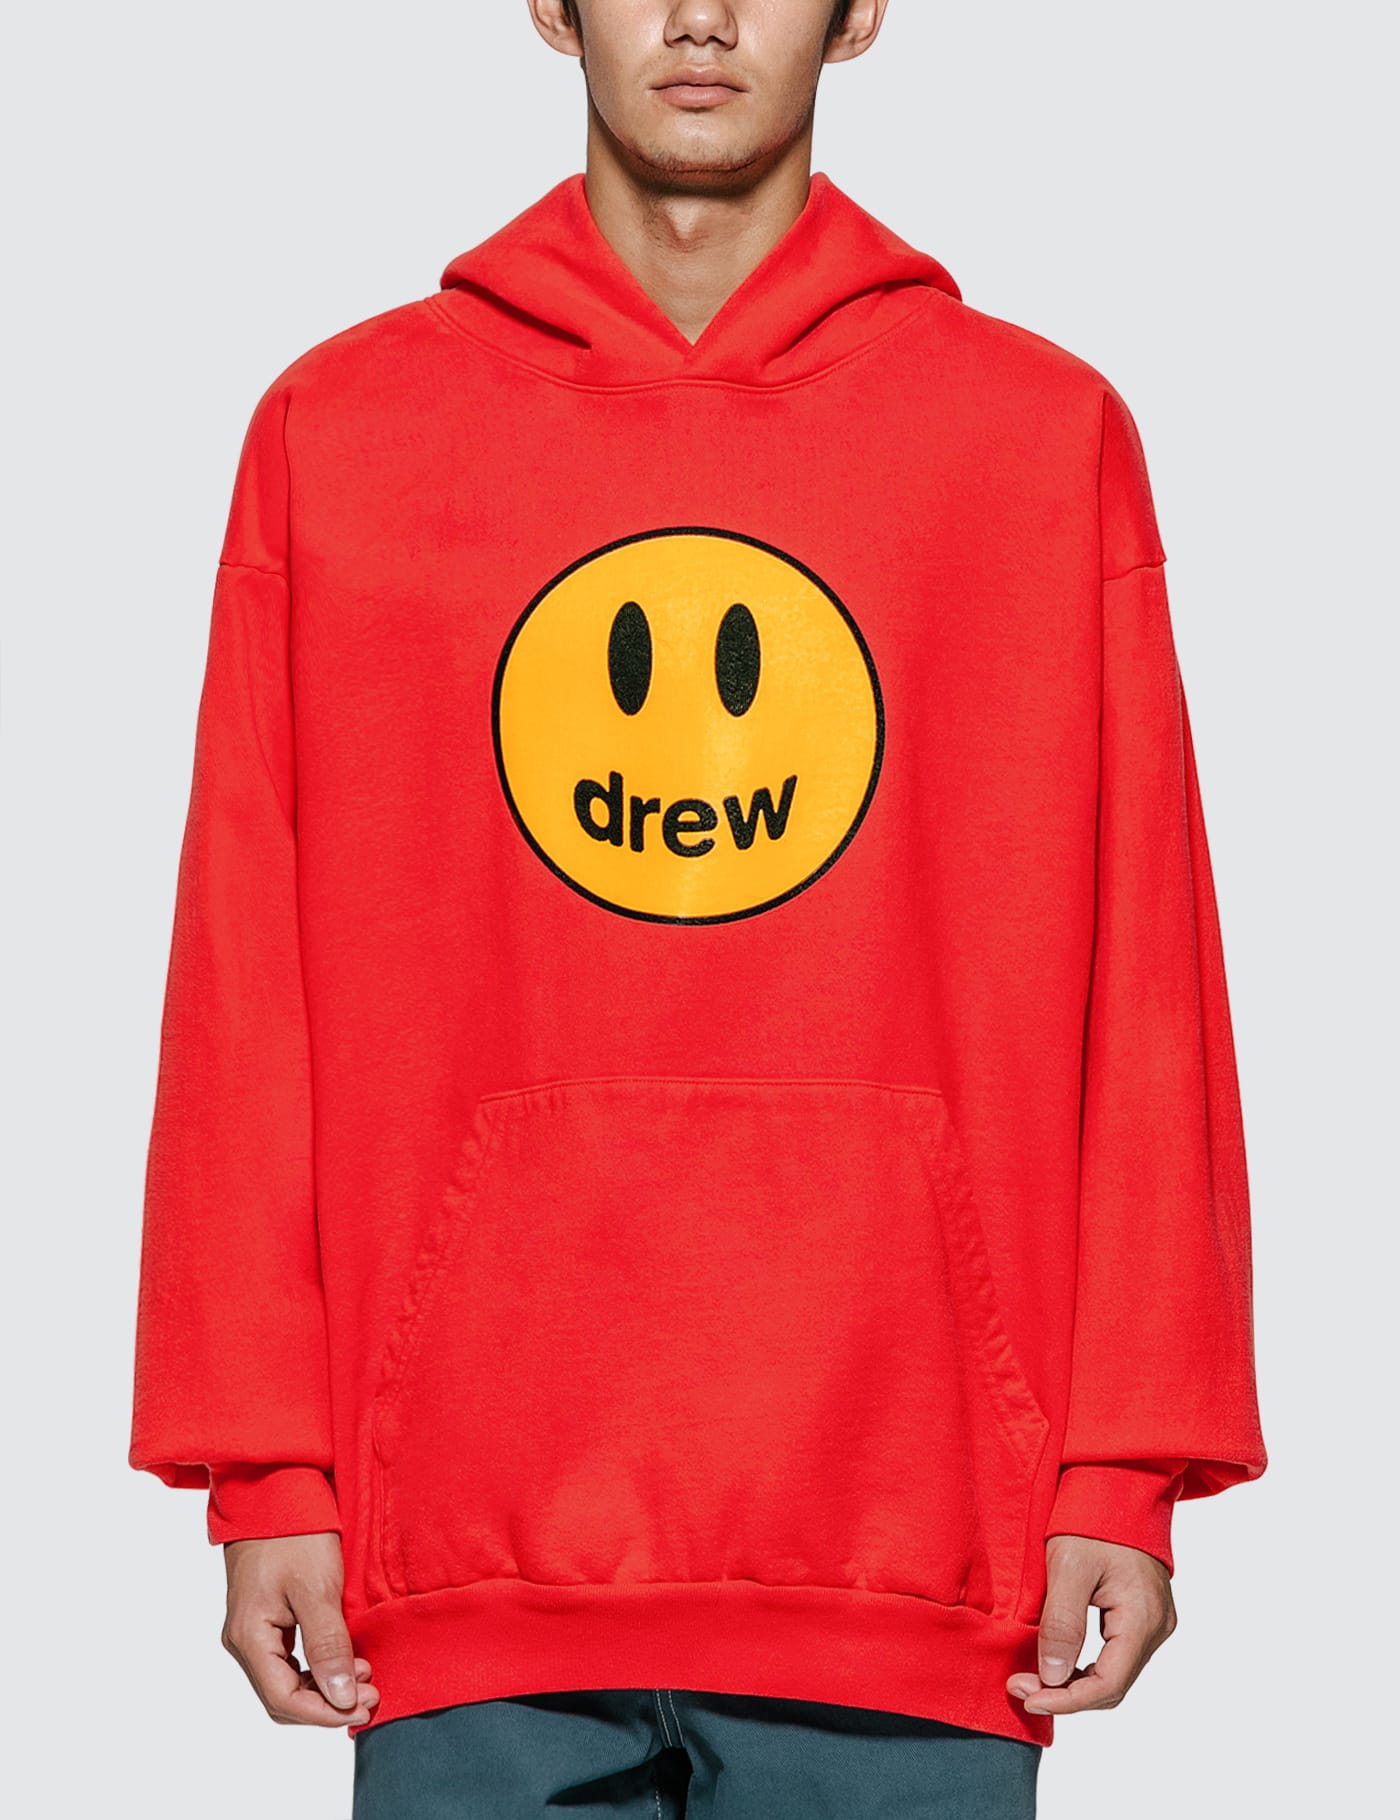 Drew House - Mascot Hoodie | HBX - Globally Curated Fashion and